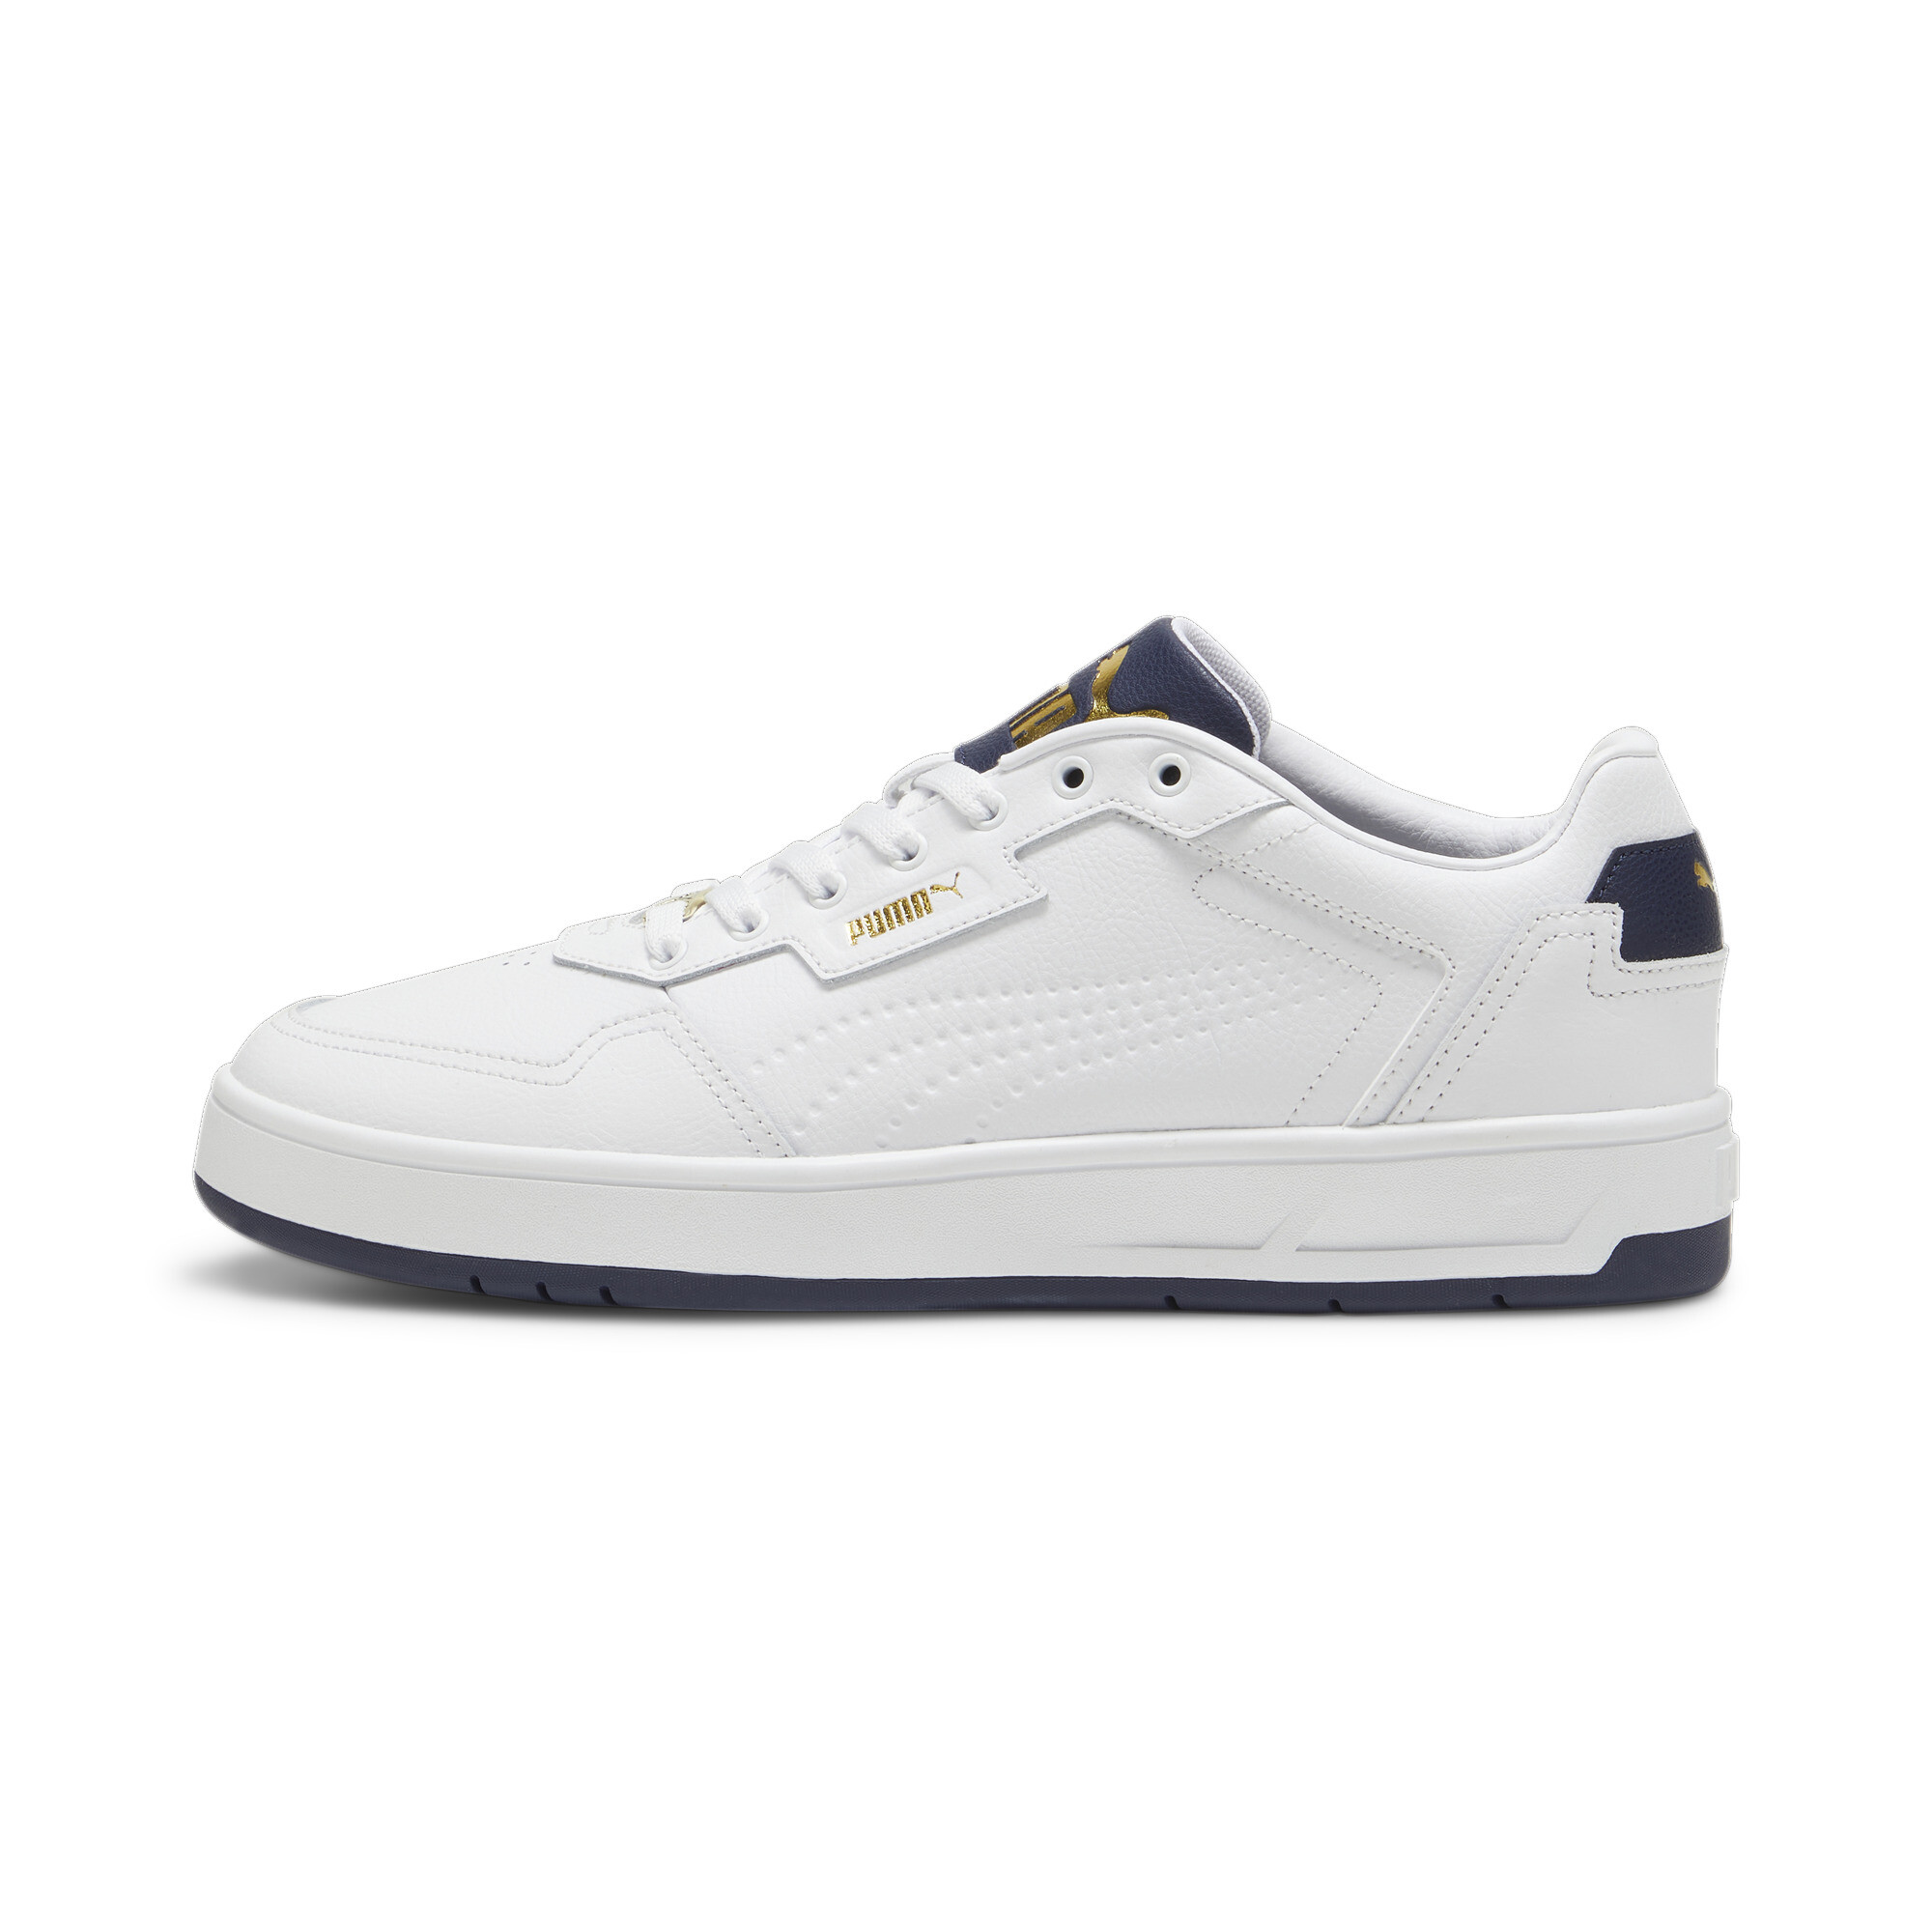 Puma Court Classic Lux Sneakers, White, Size 43, Shoes